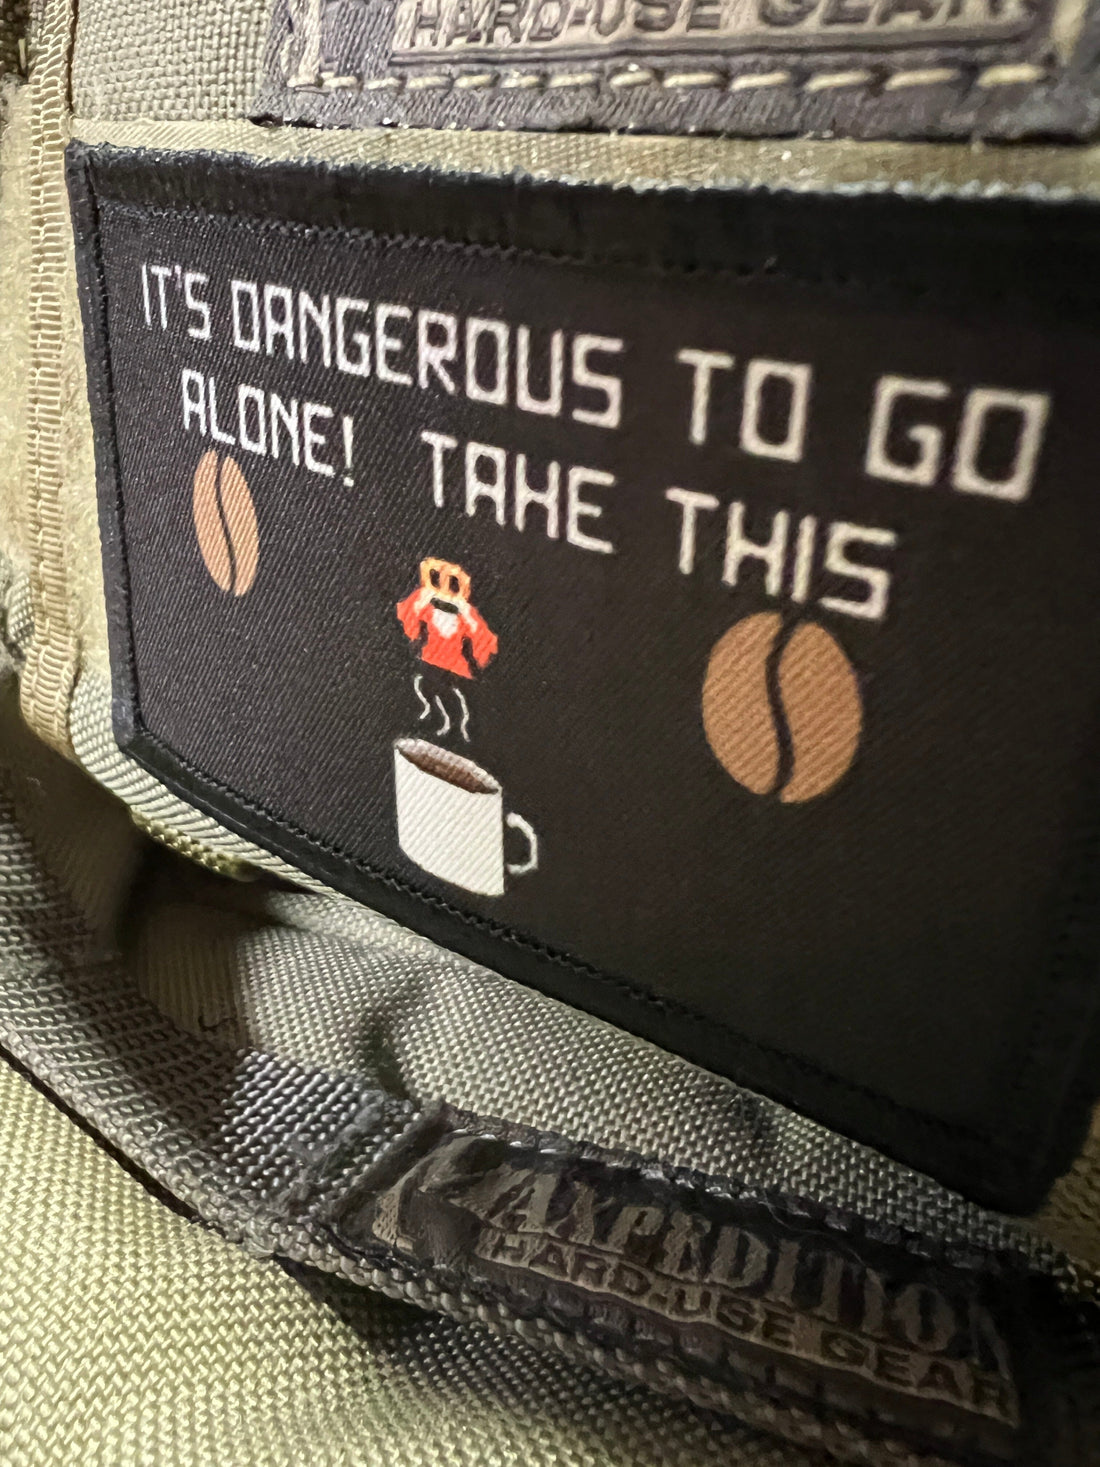 Level Up with Coffee and Gaming Humor - The "It's Dangerous to go alone! Take this" Velcro Morale Patch!